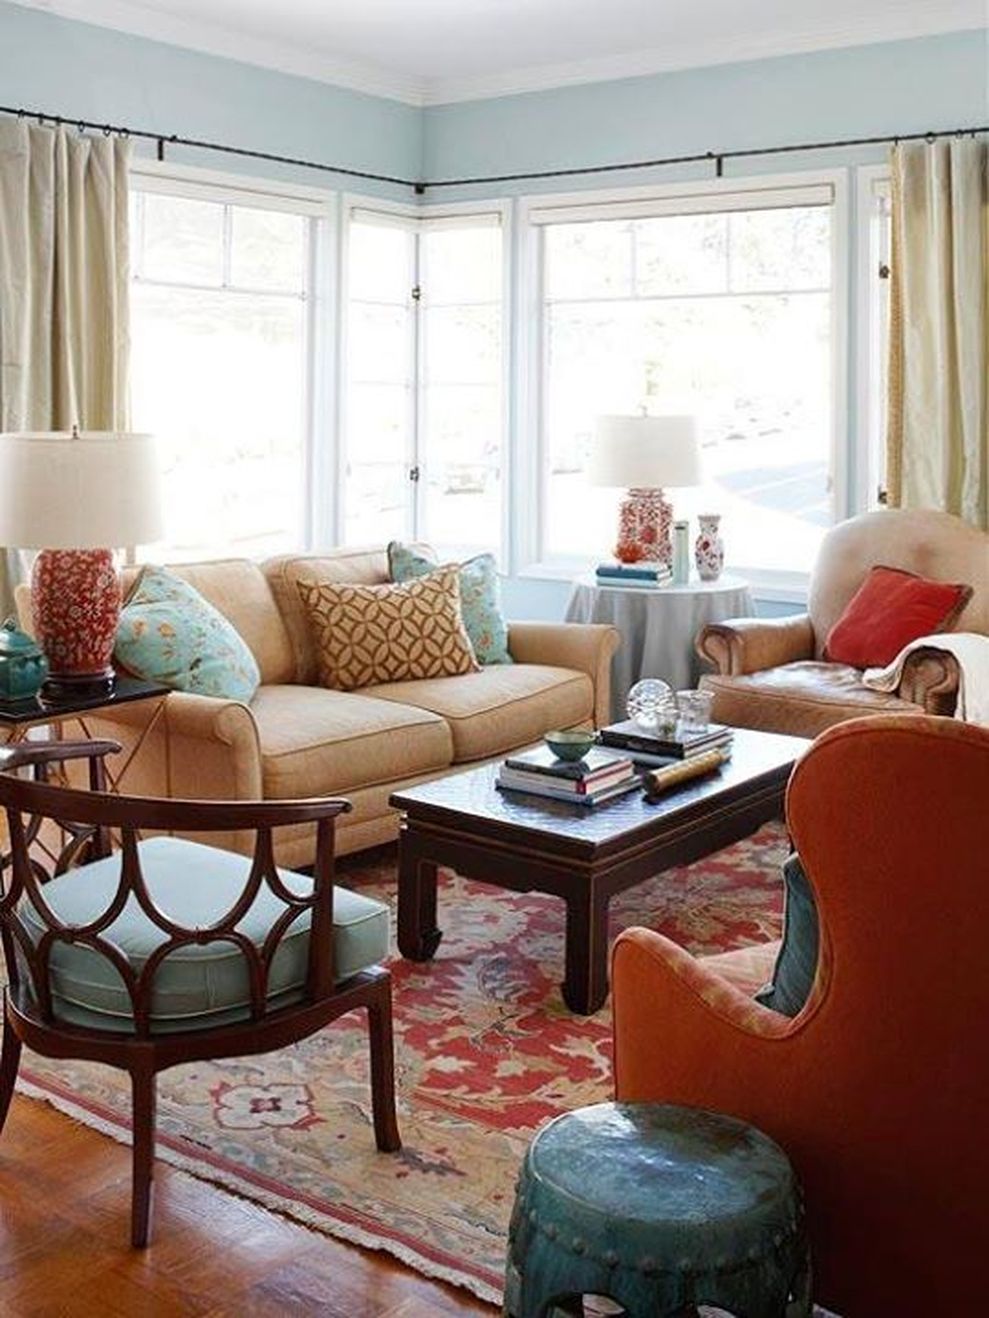 53 Adorable Burnt Orange And Teal Living Room Ideas ...